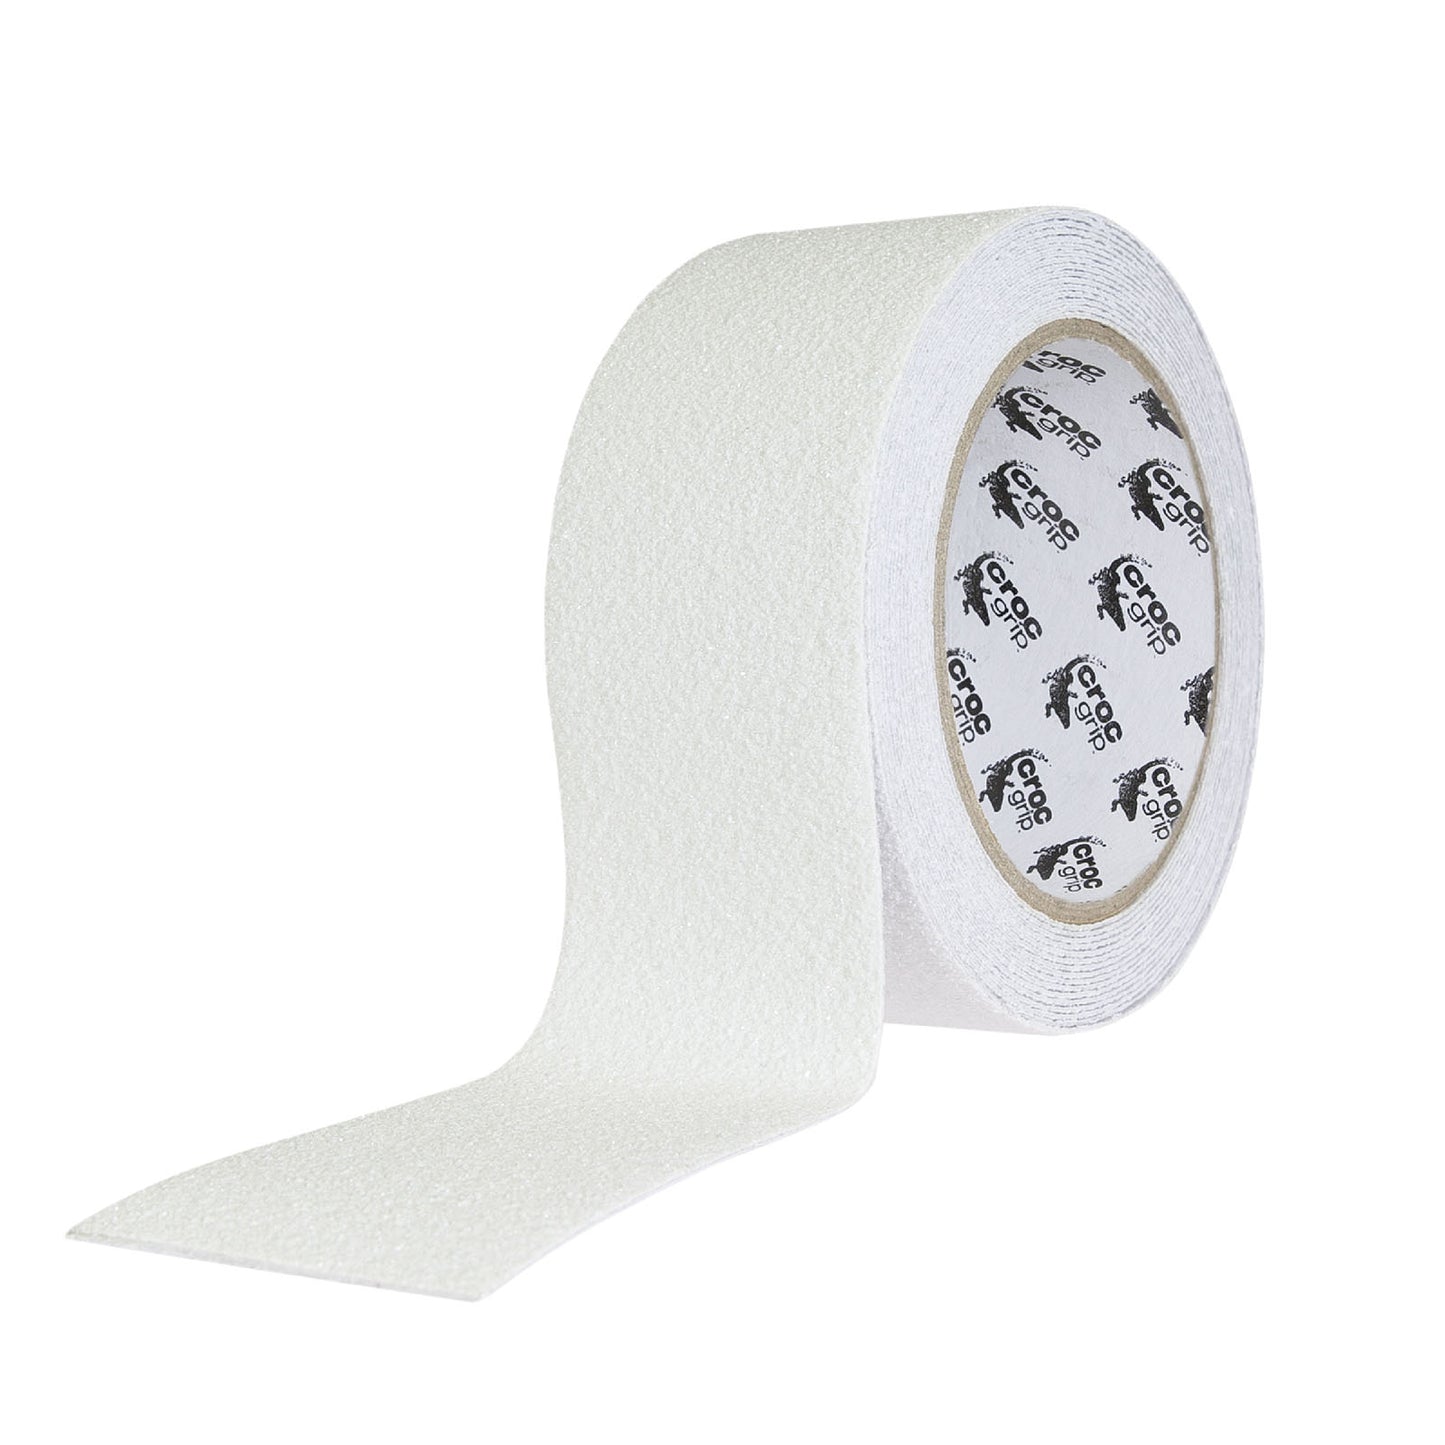 5M x 50MM Clear Commercial High Grit Anti-Slip Tape